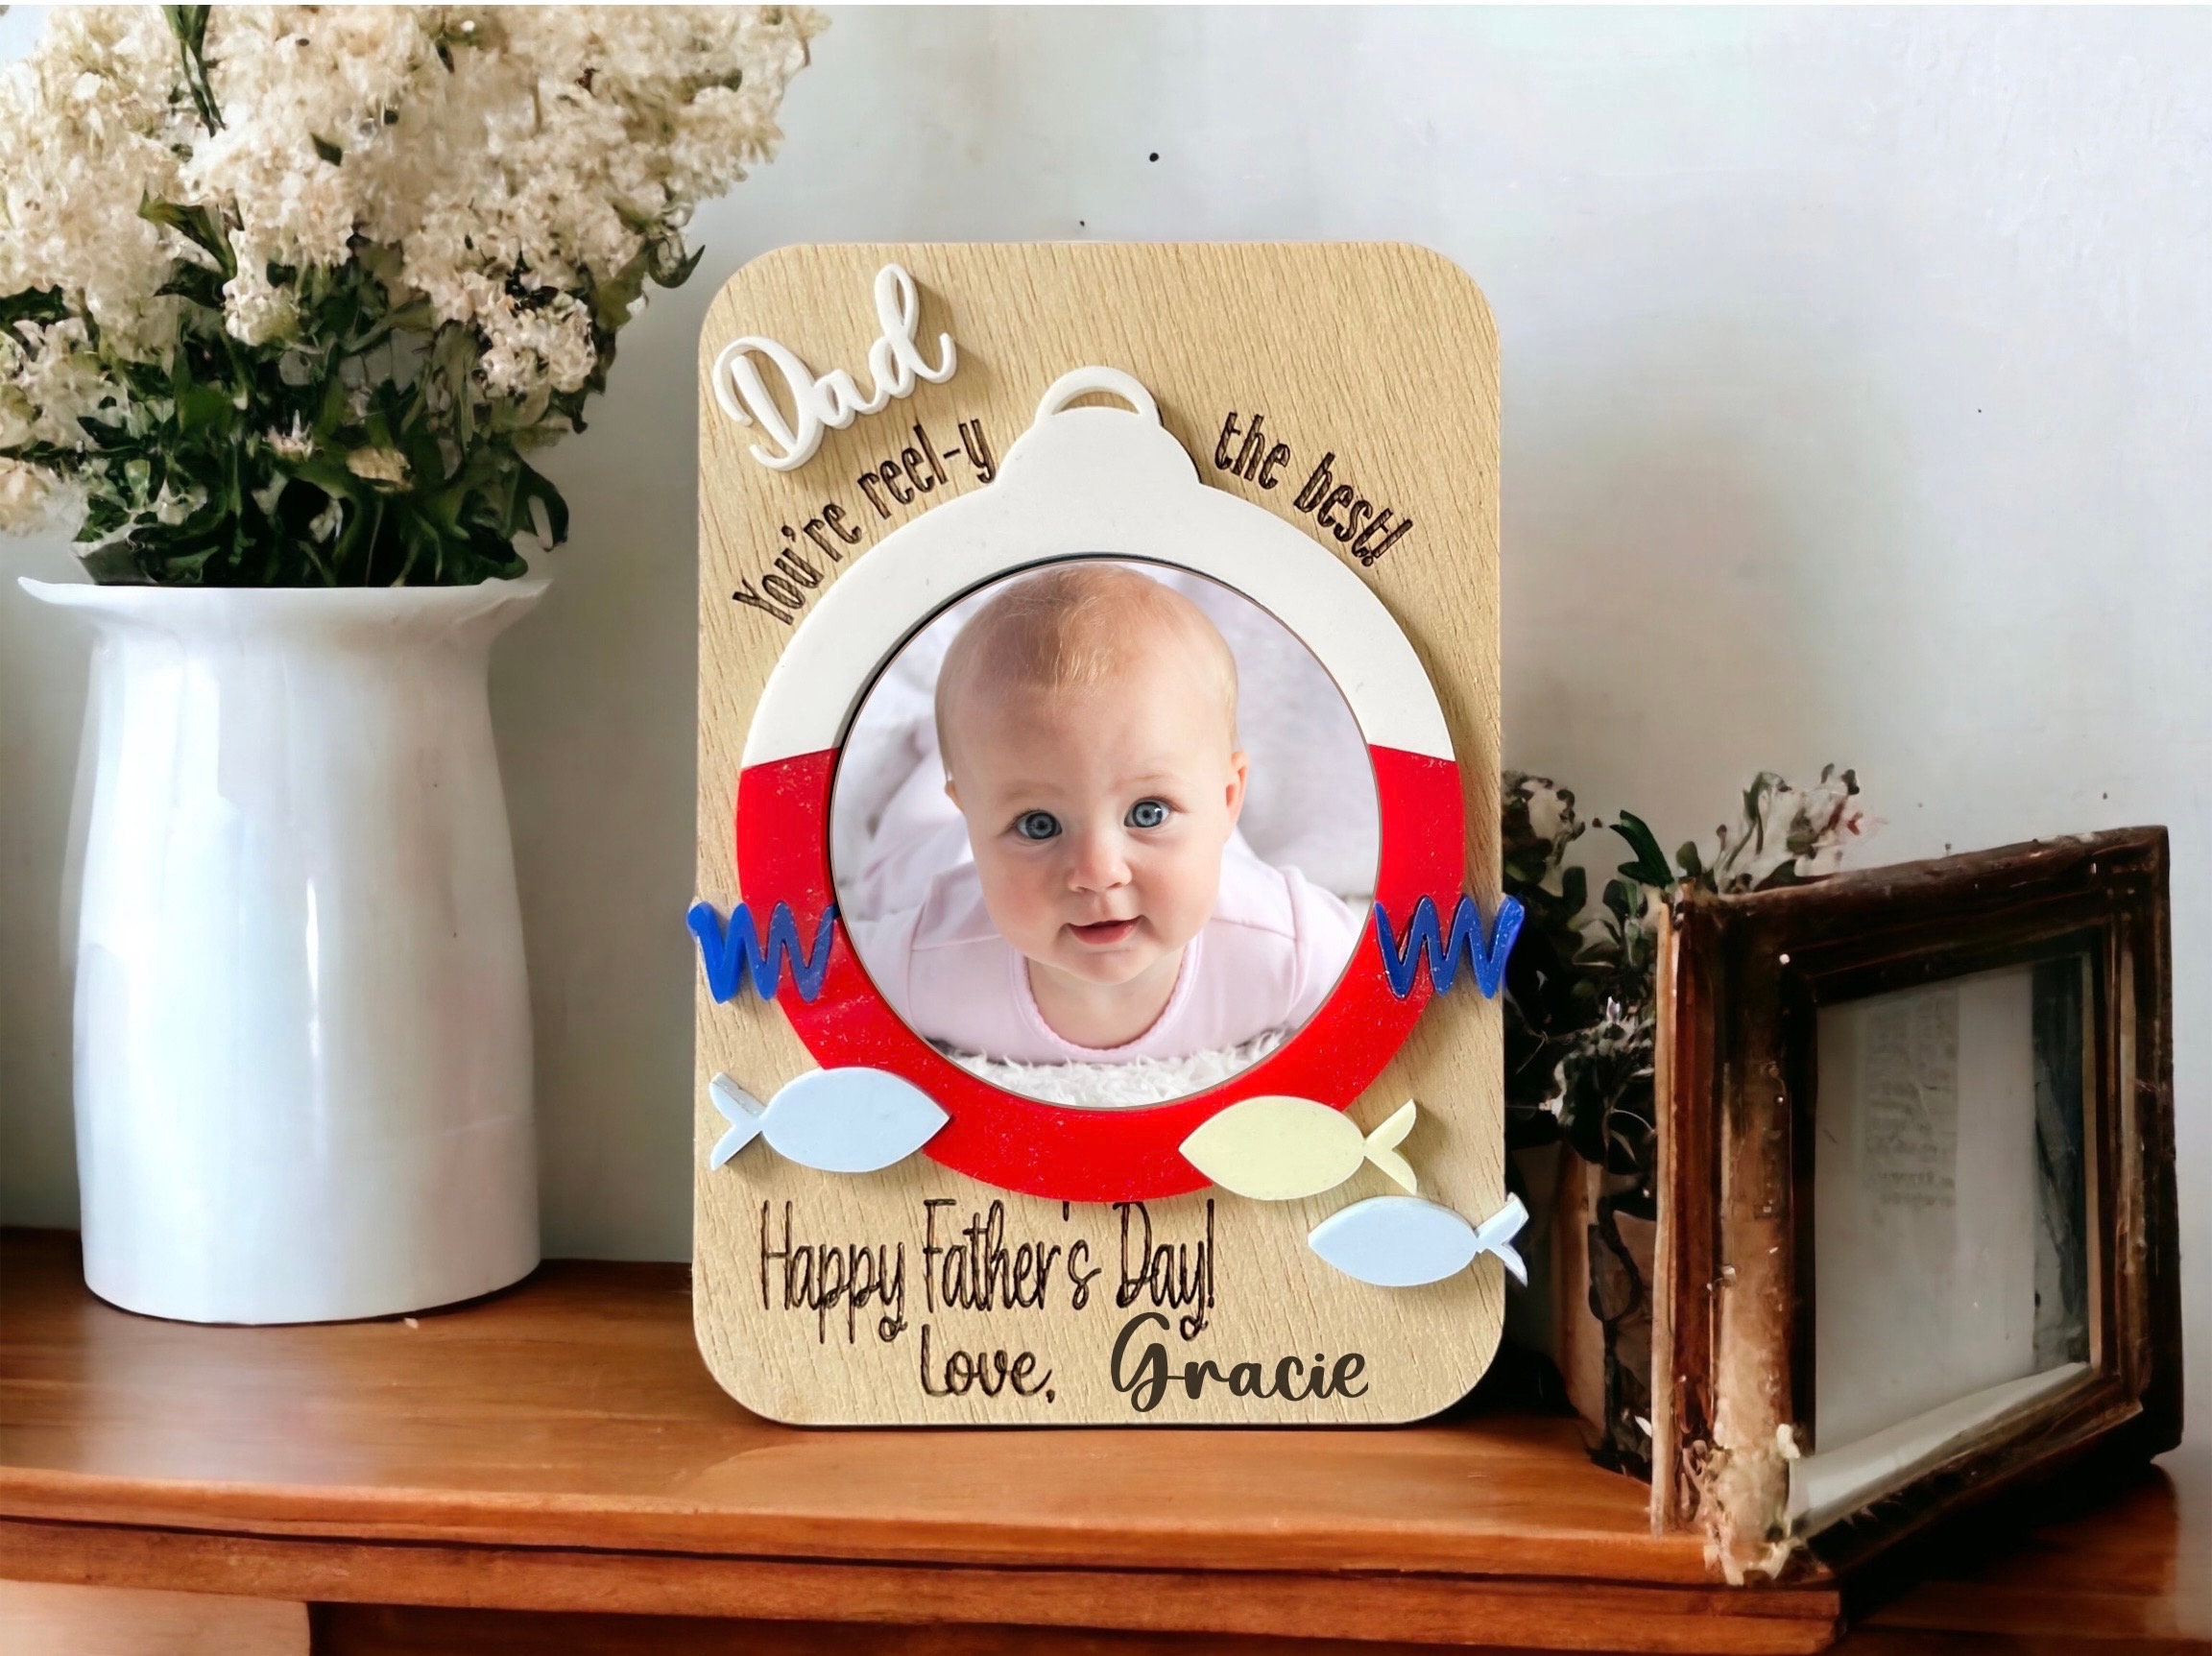 Moments to Treasure Magnet Frame Decoration Sentimental Gifts for Him Gifts  for Her Personalised Photo Frame Love Gifts Decor 